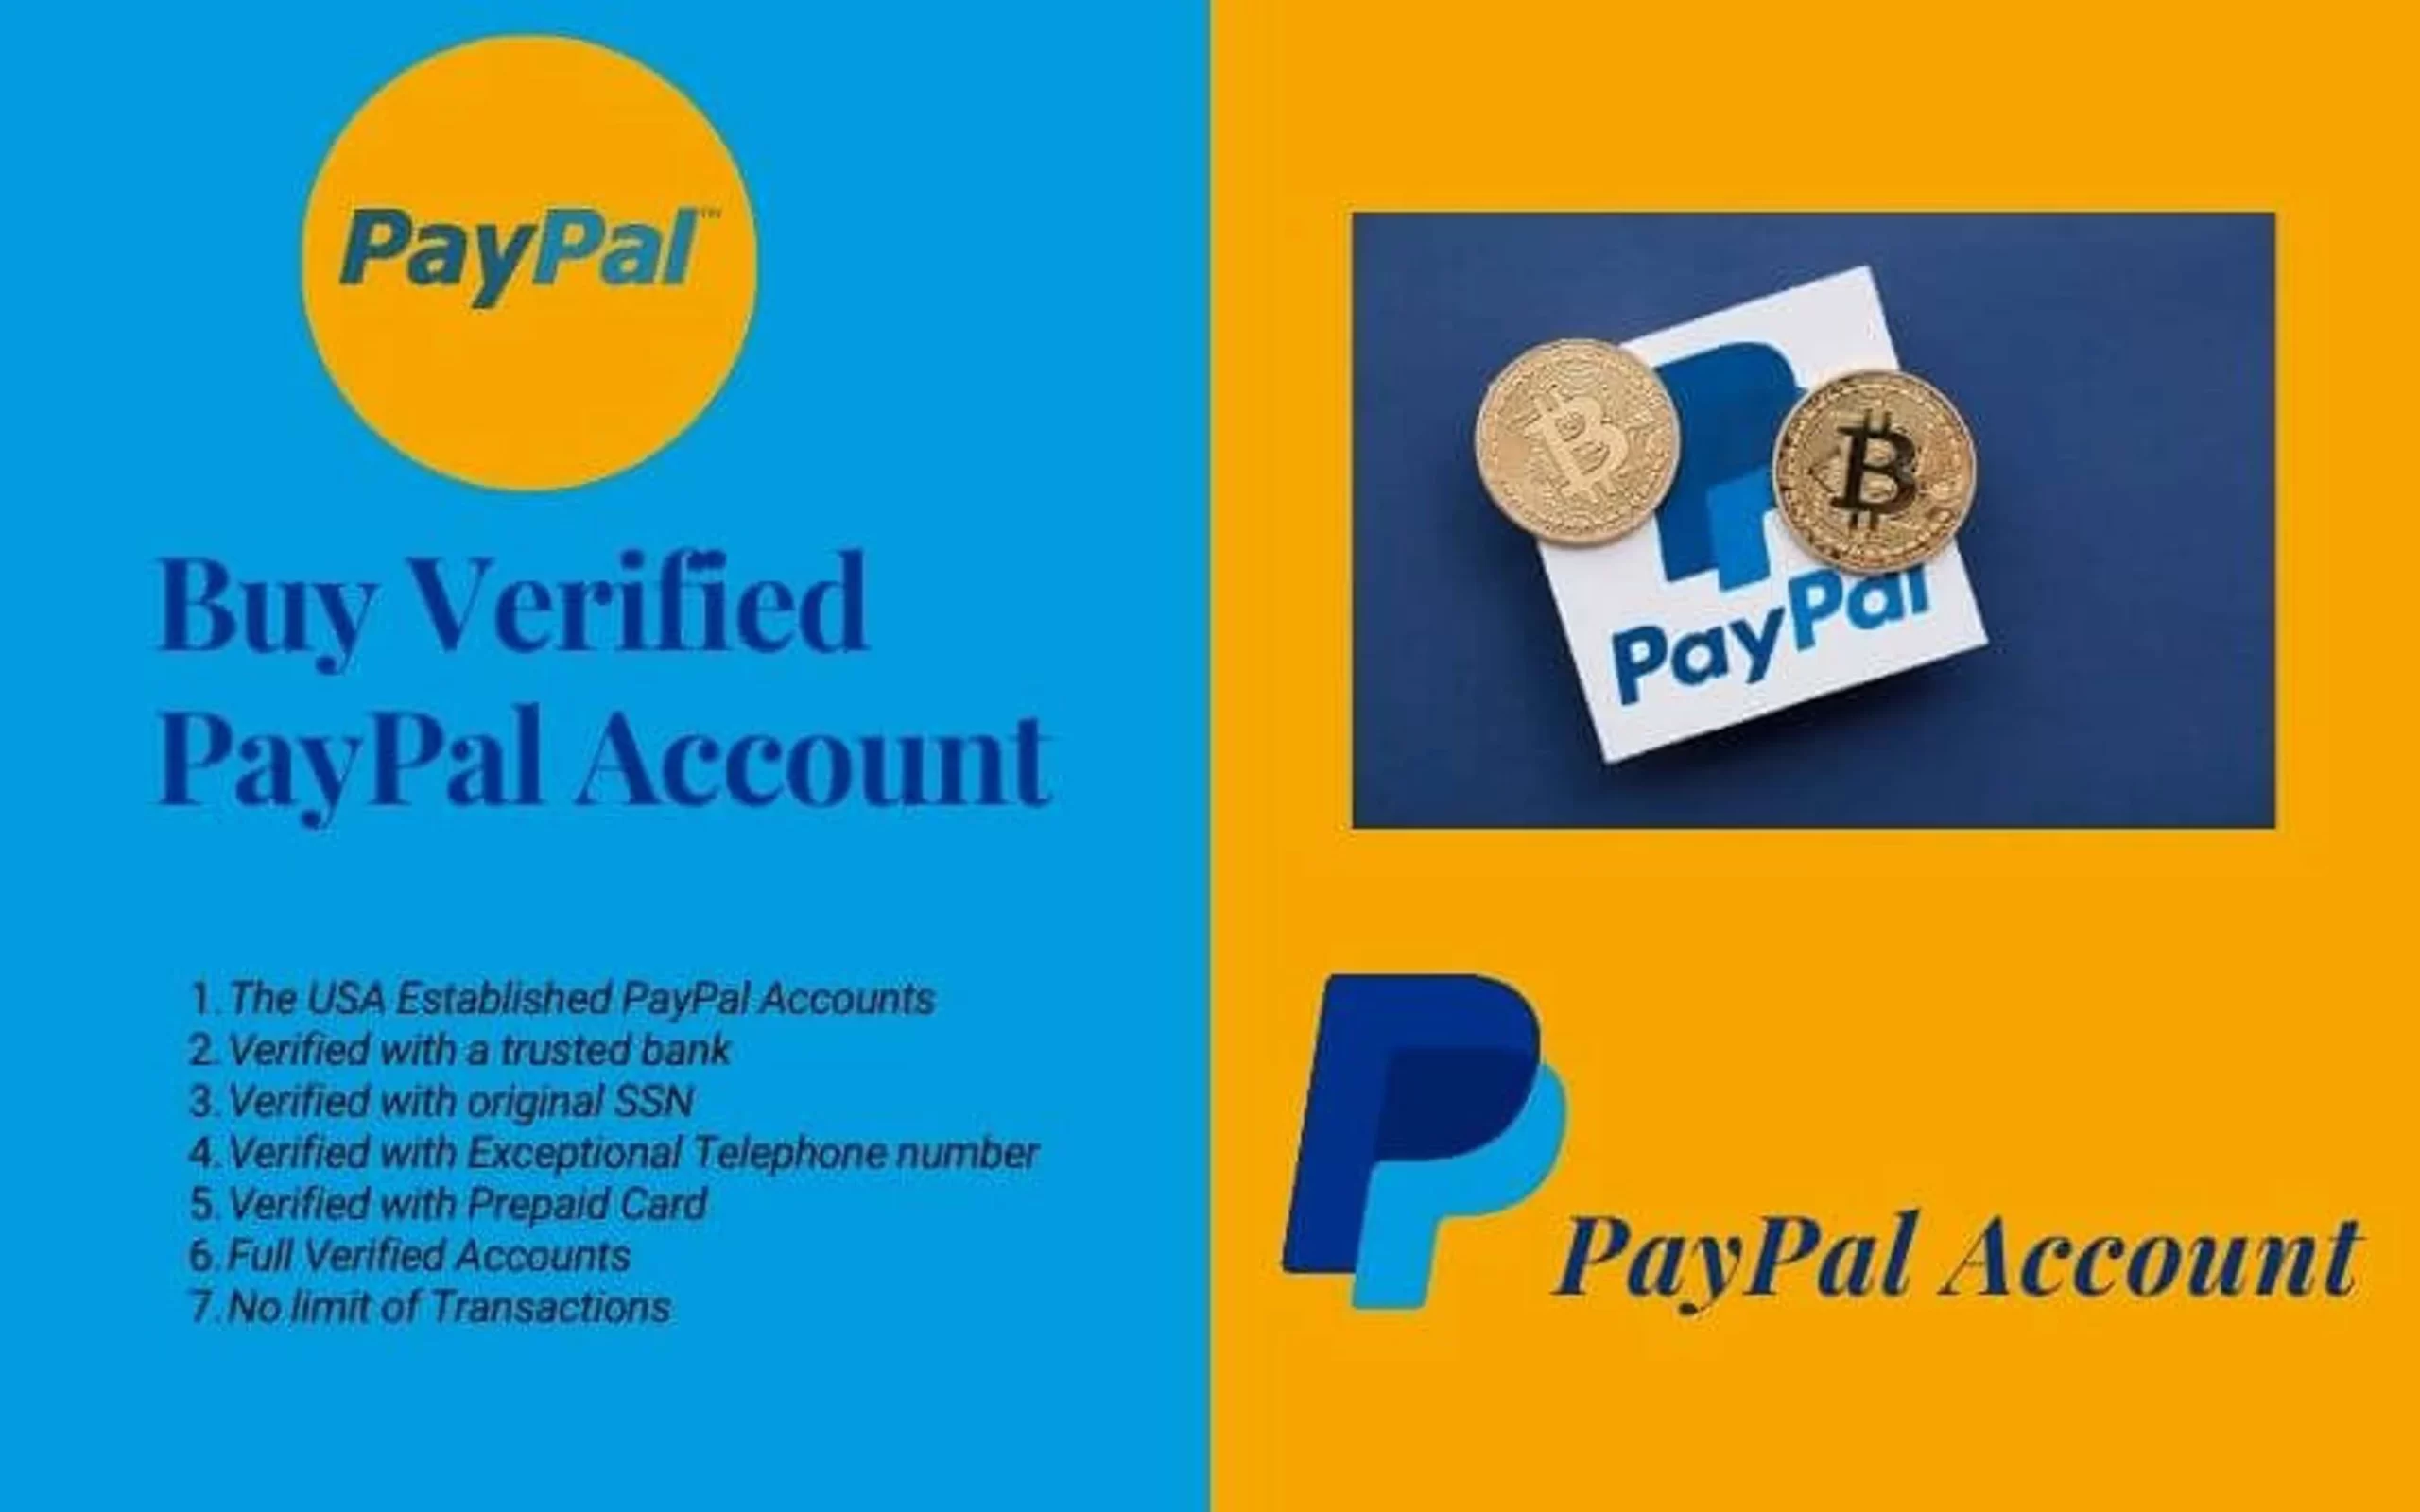 Buy verified paypal accounts